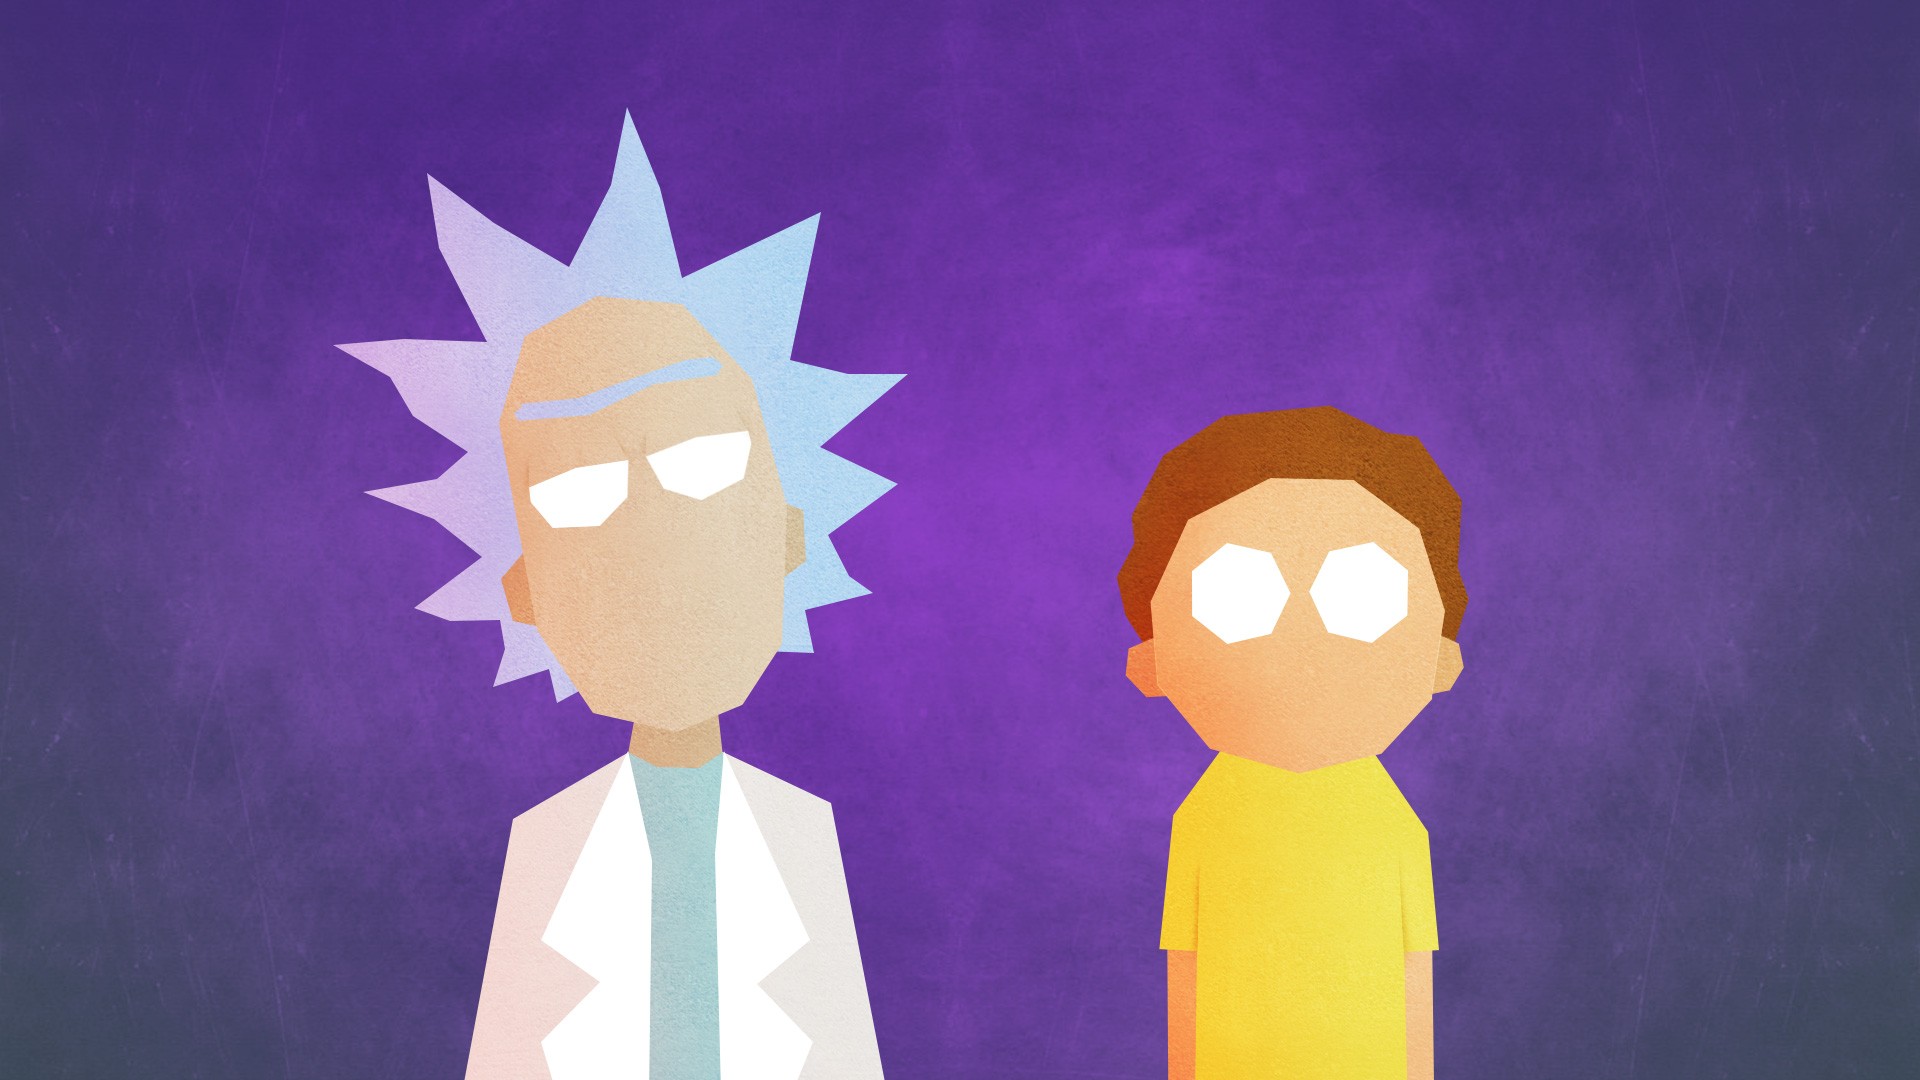 Rick and Morty For Desktop Wallpaper with high-resolution 1920x1080 pixel. You can use this poster wallpaper for your Desktop Computers, Mac Screensavers, Windows Backgrounds, iPhone Wallpapers, Tablet or Android Lock screen and another Mobile device